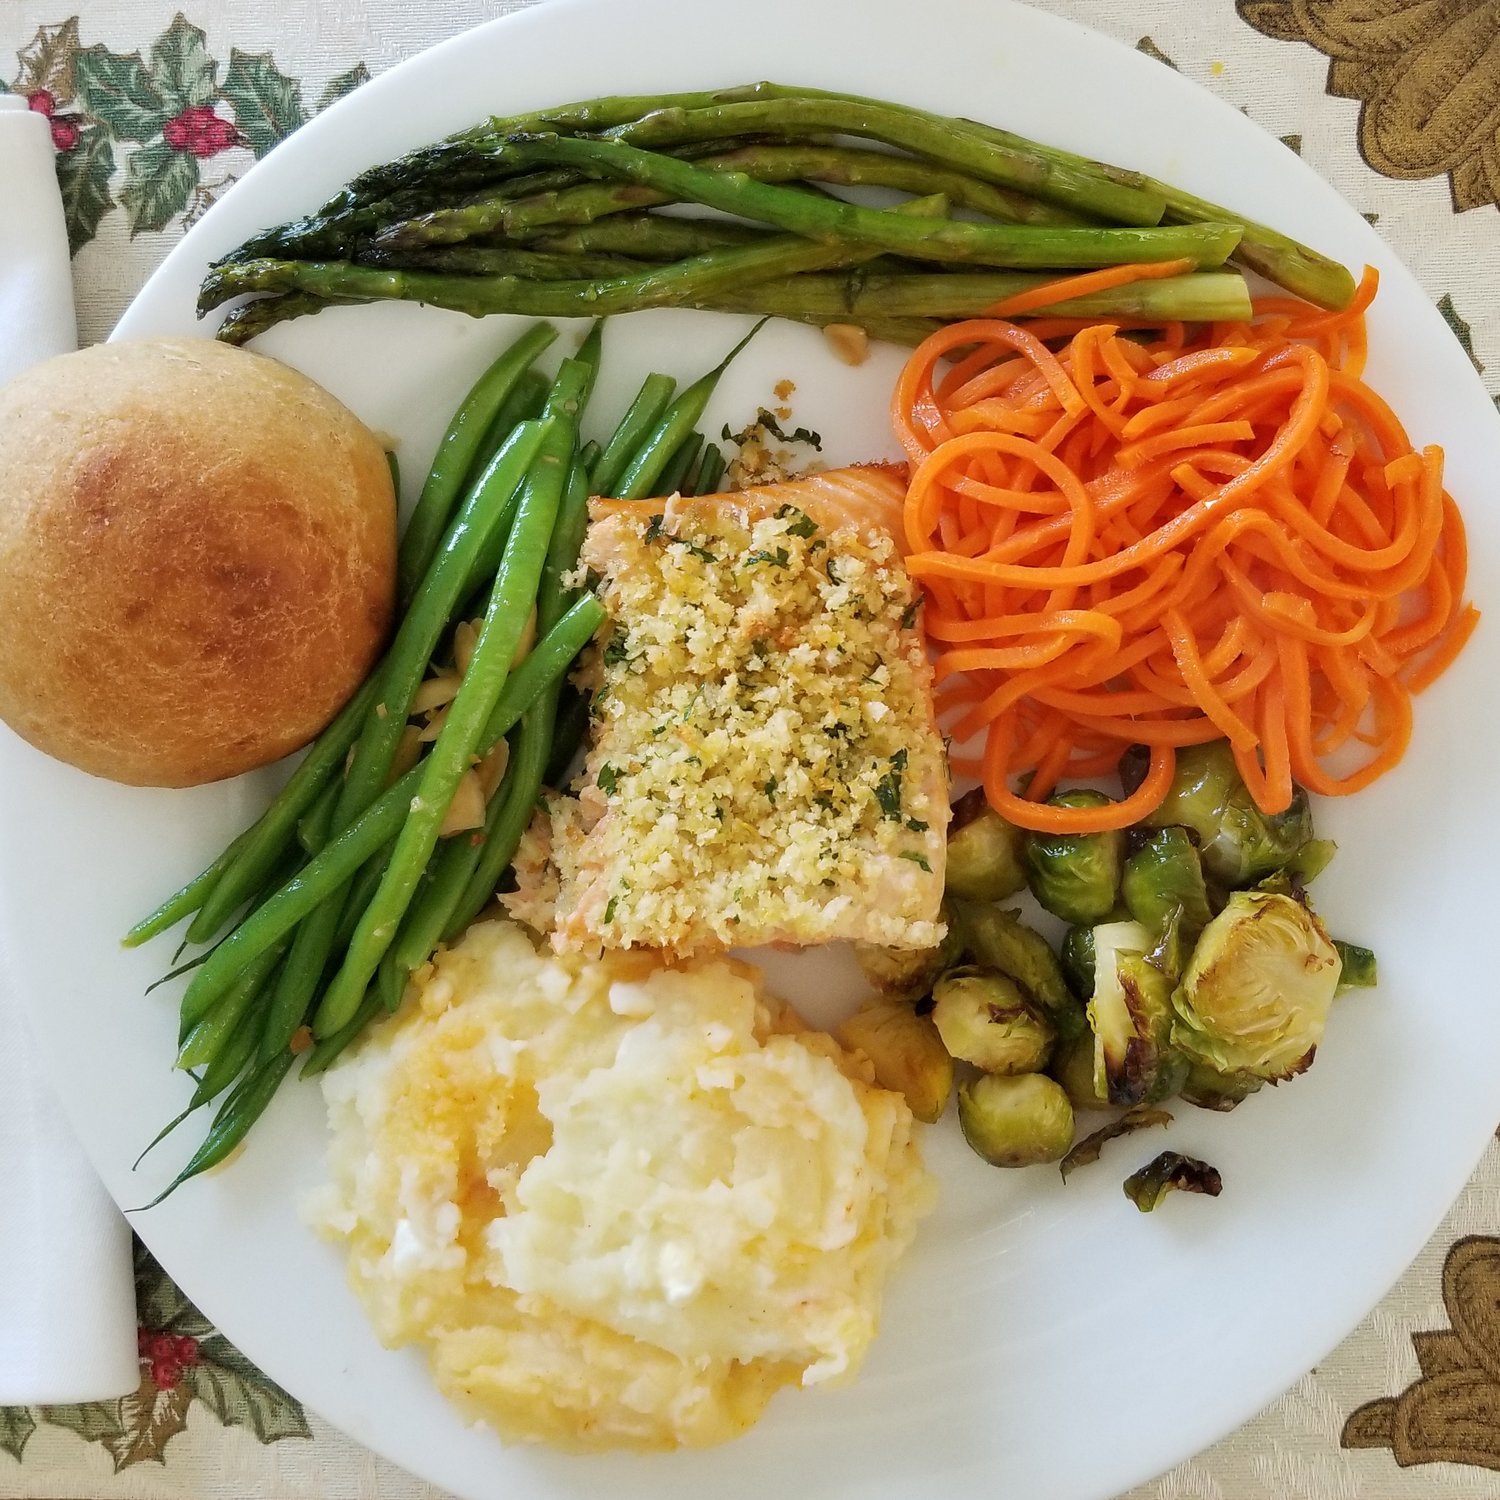 Salmon, Roasted Asparagus, Carrots, Green Beans, Cottage Potatoes, Brussels, & Homemade Bread - maybe not typical with all those non-starchy veggies, but definitely healthy and balanced.